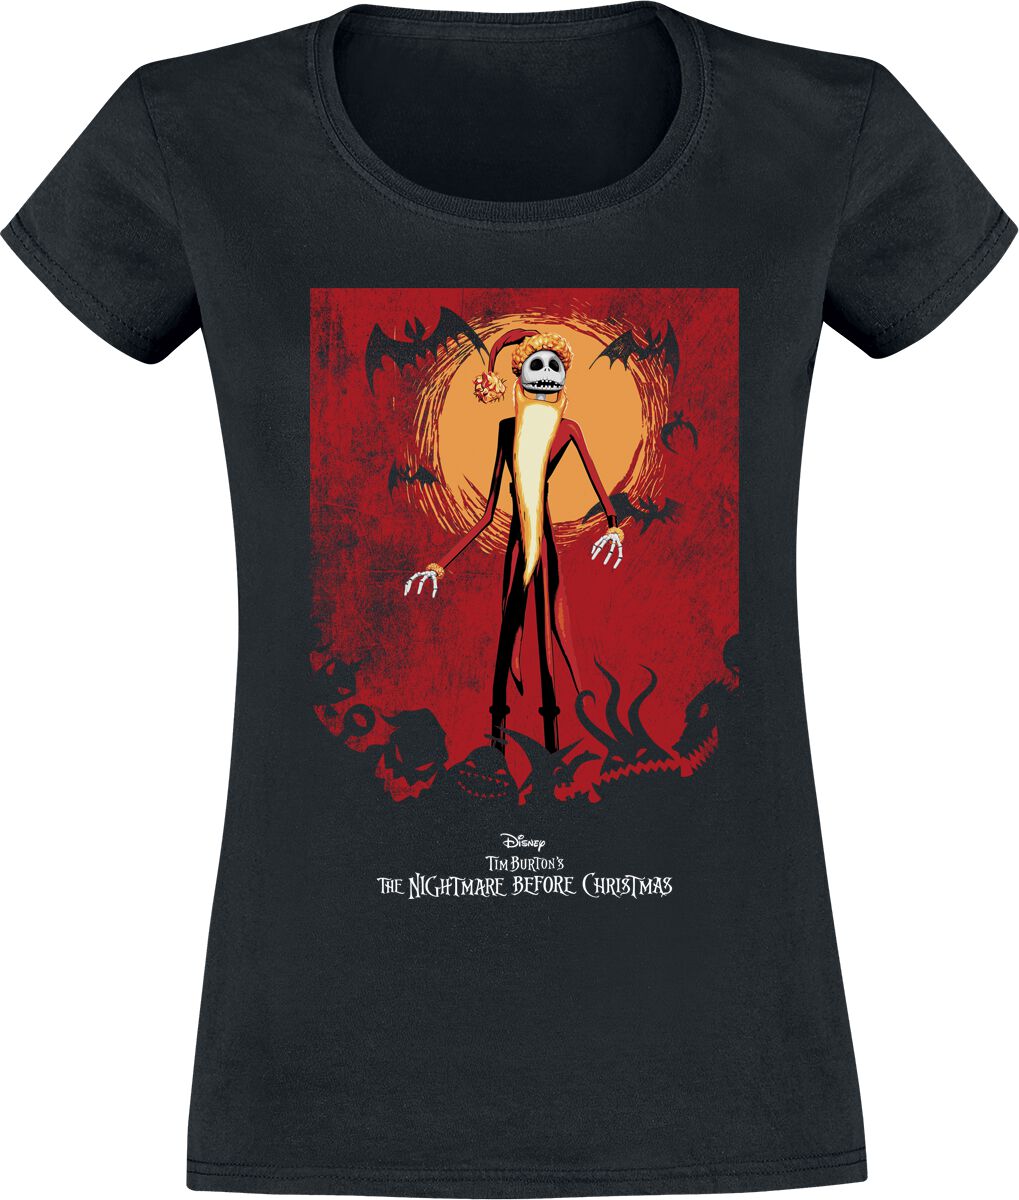 Image of T-Shirt Disney di Nightmare Before Christmas - Scary Christmas Jack - S a L - Donna - nero